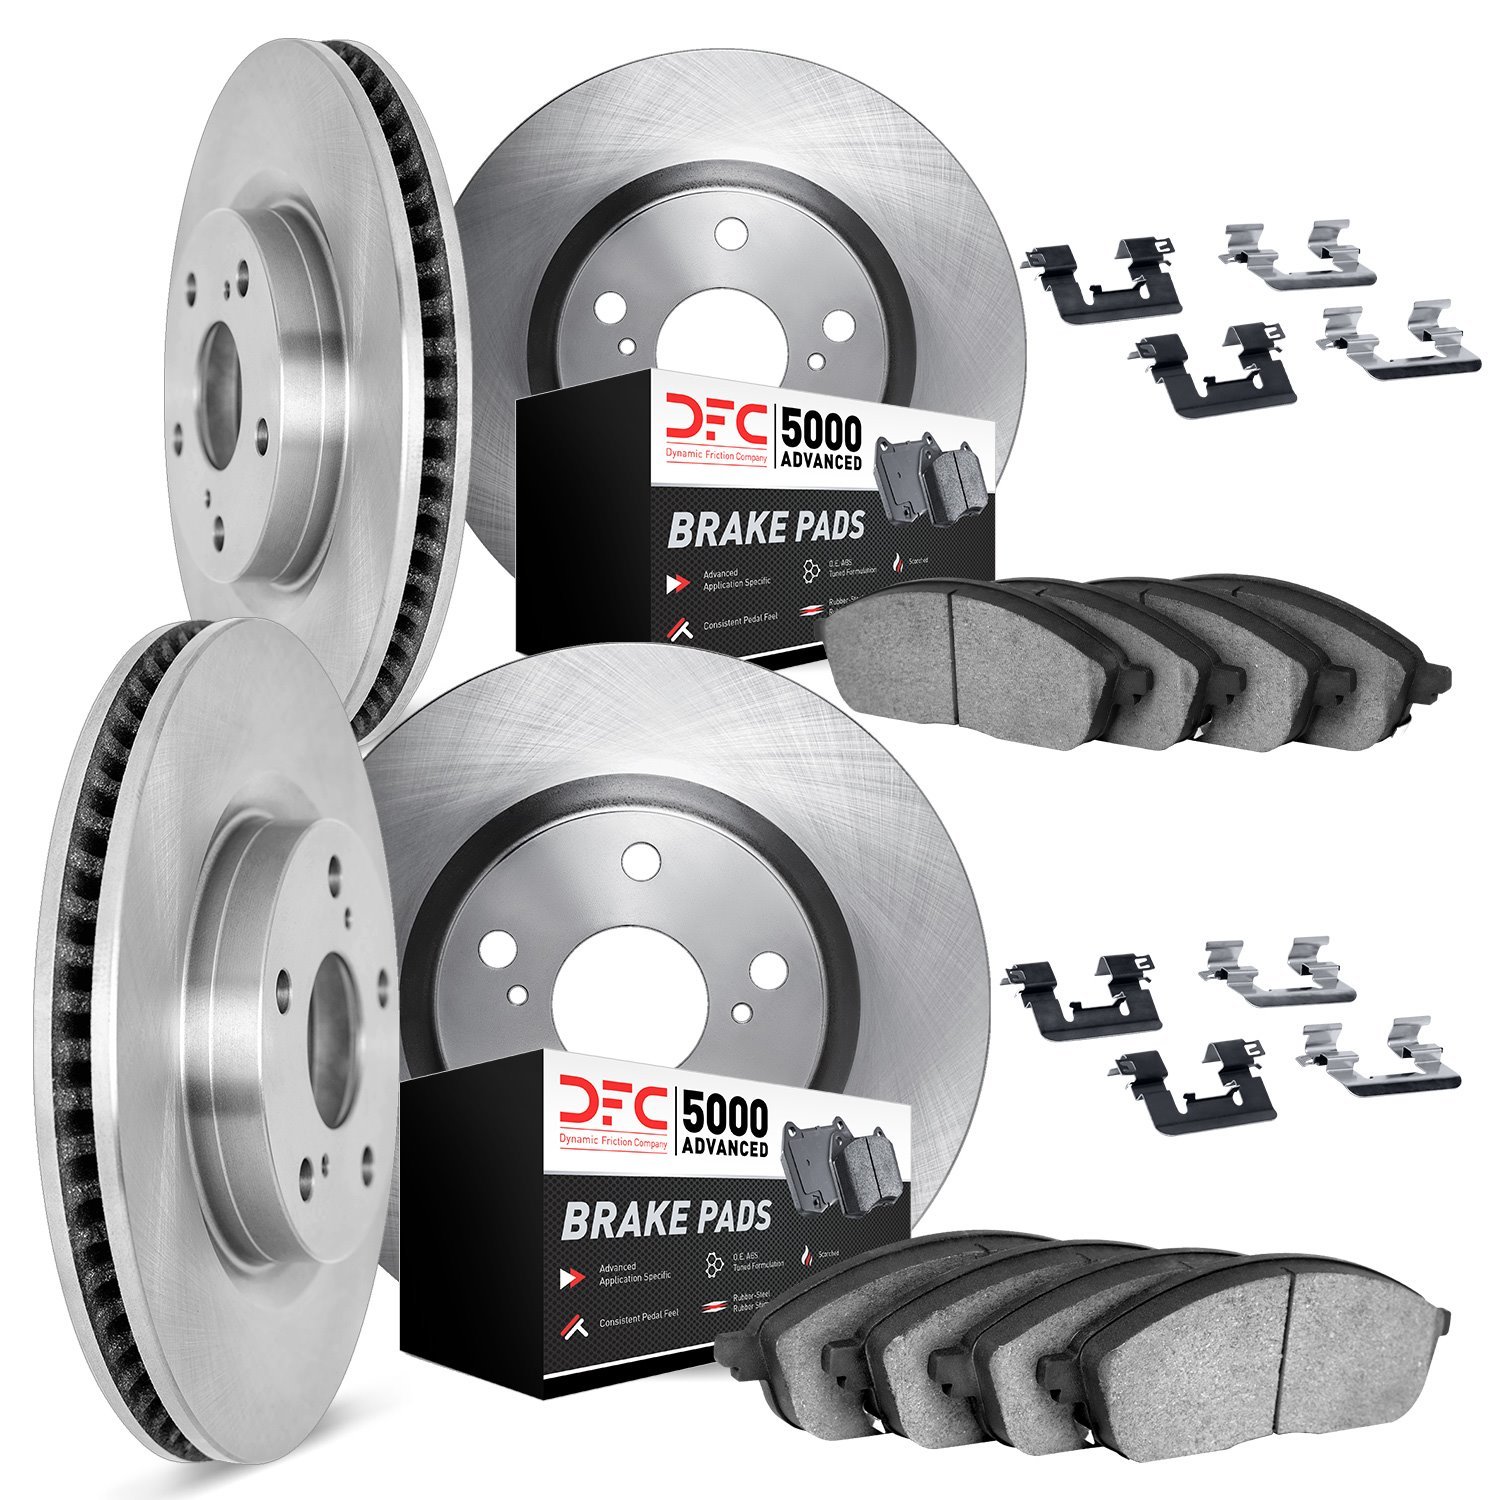 6514-67005 Brake Rotors w/5000 Advanced Brake Pads Kit with Hardware, 2004-2017 Infiniti/Nissan, Position: Front and Rear